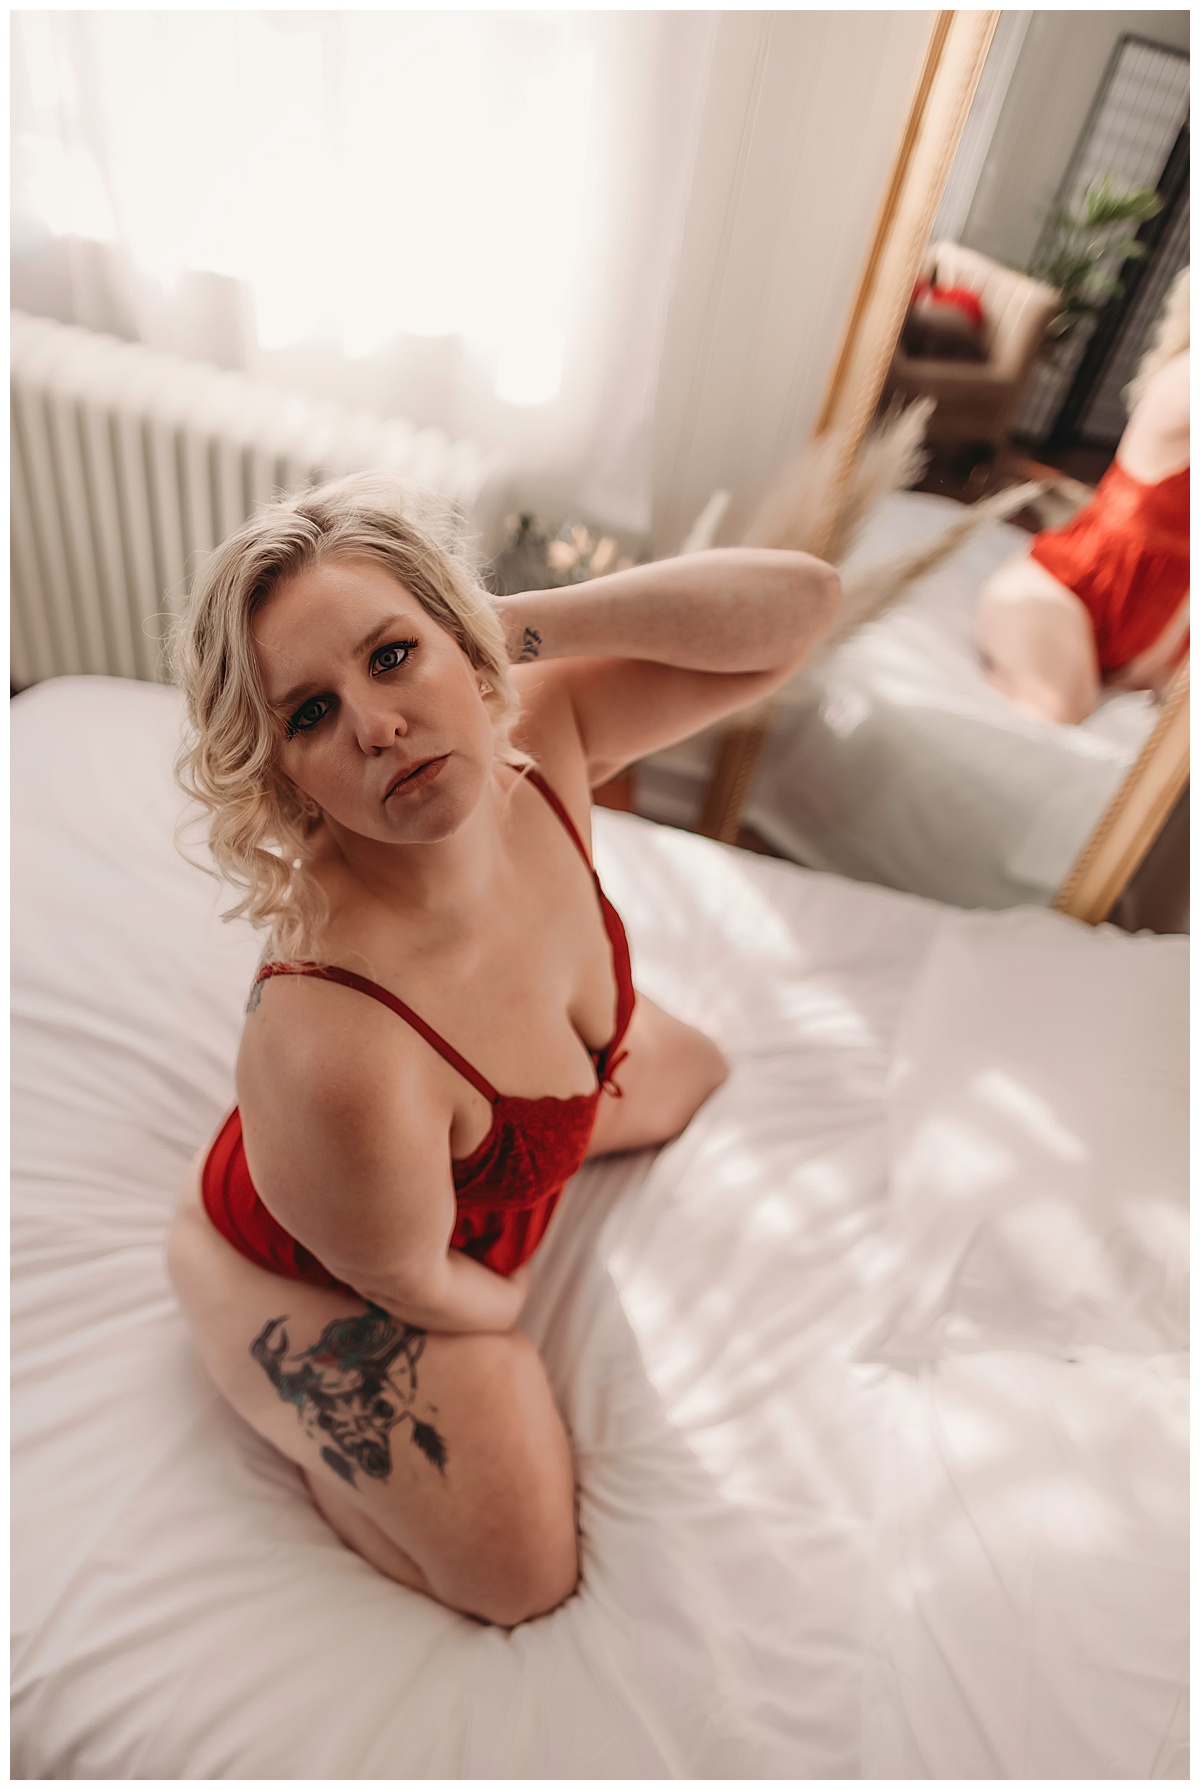 Woman in red lingerie because you are More Than Your Size